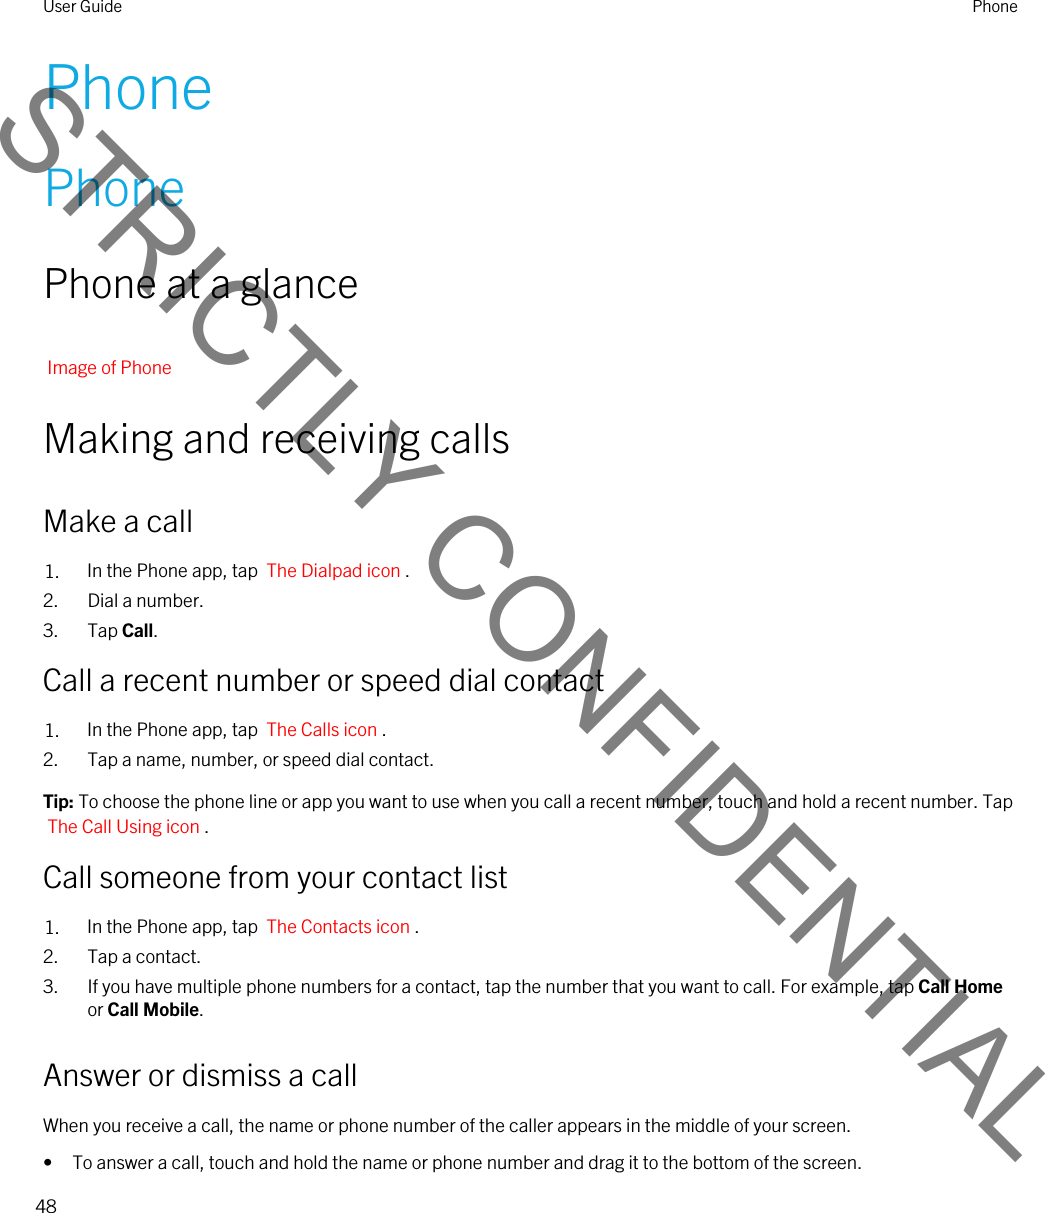 PhonePhonePhone at a glanceImage of PhoneMaking and receiving callsMake a call1. In the Phone app, tap  The Dialpad icon .2. Dial a number.3. Tap Call.Call a recent number or speed dial contact1. In the Phone app, tap  The Calls icon .2. Tap a name, number, or speed dial contact.Tip: To choose the phone line or app you want to use when you call a recent number, touch and hold a recent number. Tap The Call Using icon .Call someone from your contact list1. In the Phone app, tap  The Contacts icon .2. Tap a contact.3. If you have multiple phone numbers for a contact, tap the number that you want to call. For example, tap Call Home or Call Mobile.Answer or dismiss a callWhen you receive a call, the name or phone number of the caller appears in the middle of your screen.• To answer a call, touch and hold the name or phone number and drag it to the bottom of the screen.User Guide Phone48STRICTLY CONFIDENTIAL